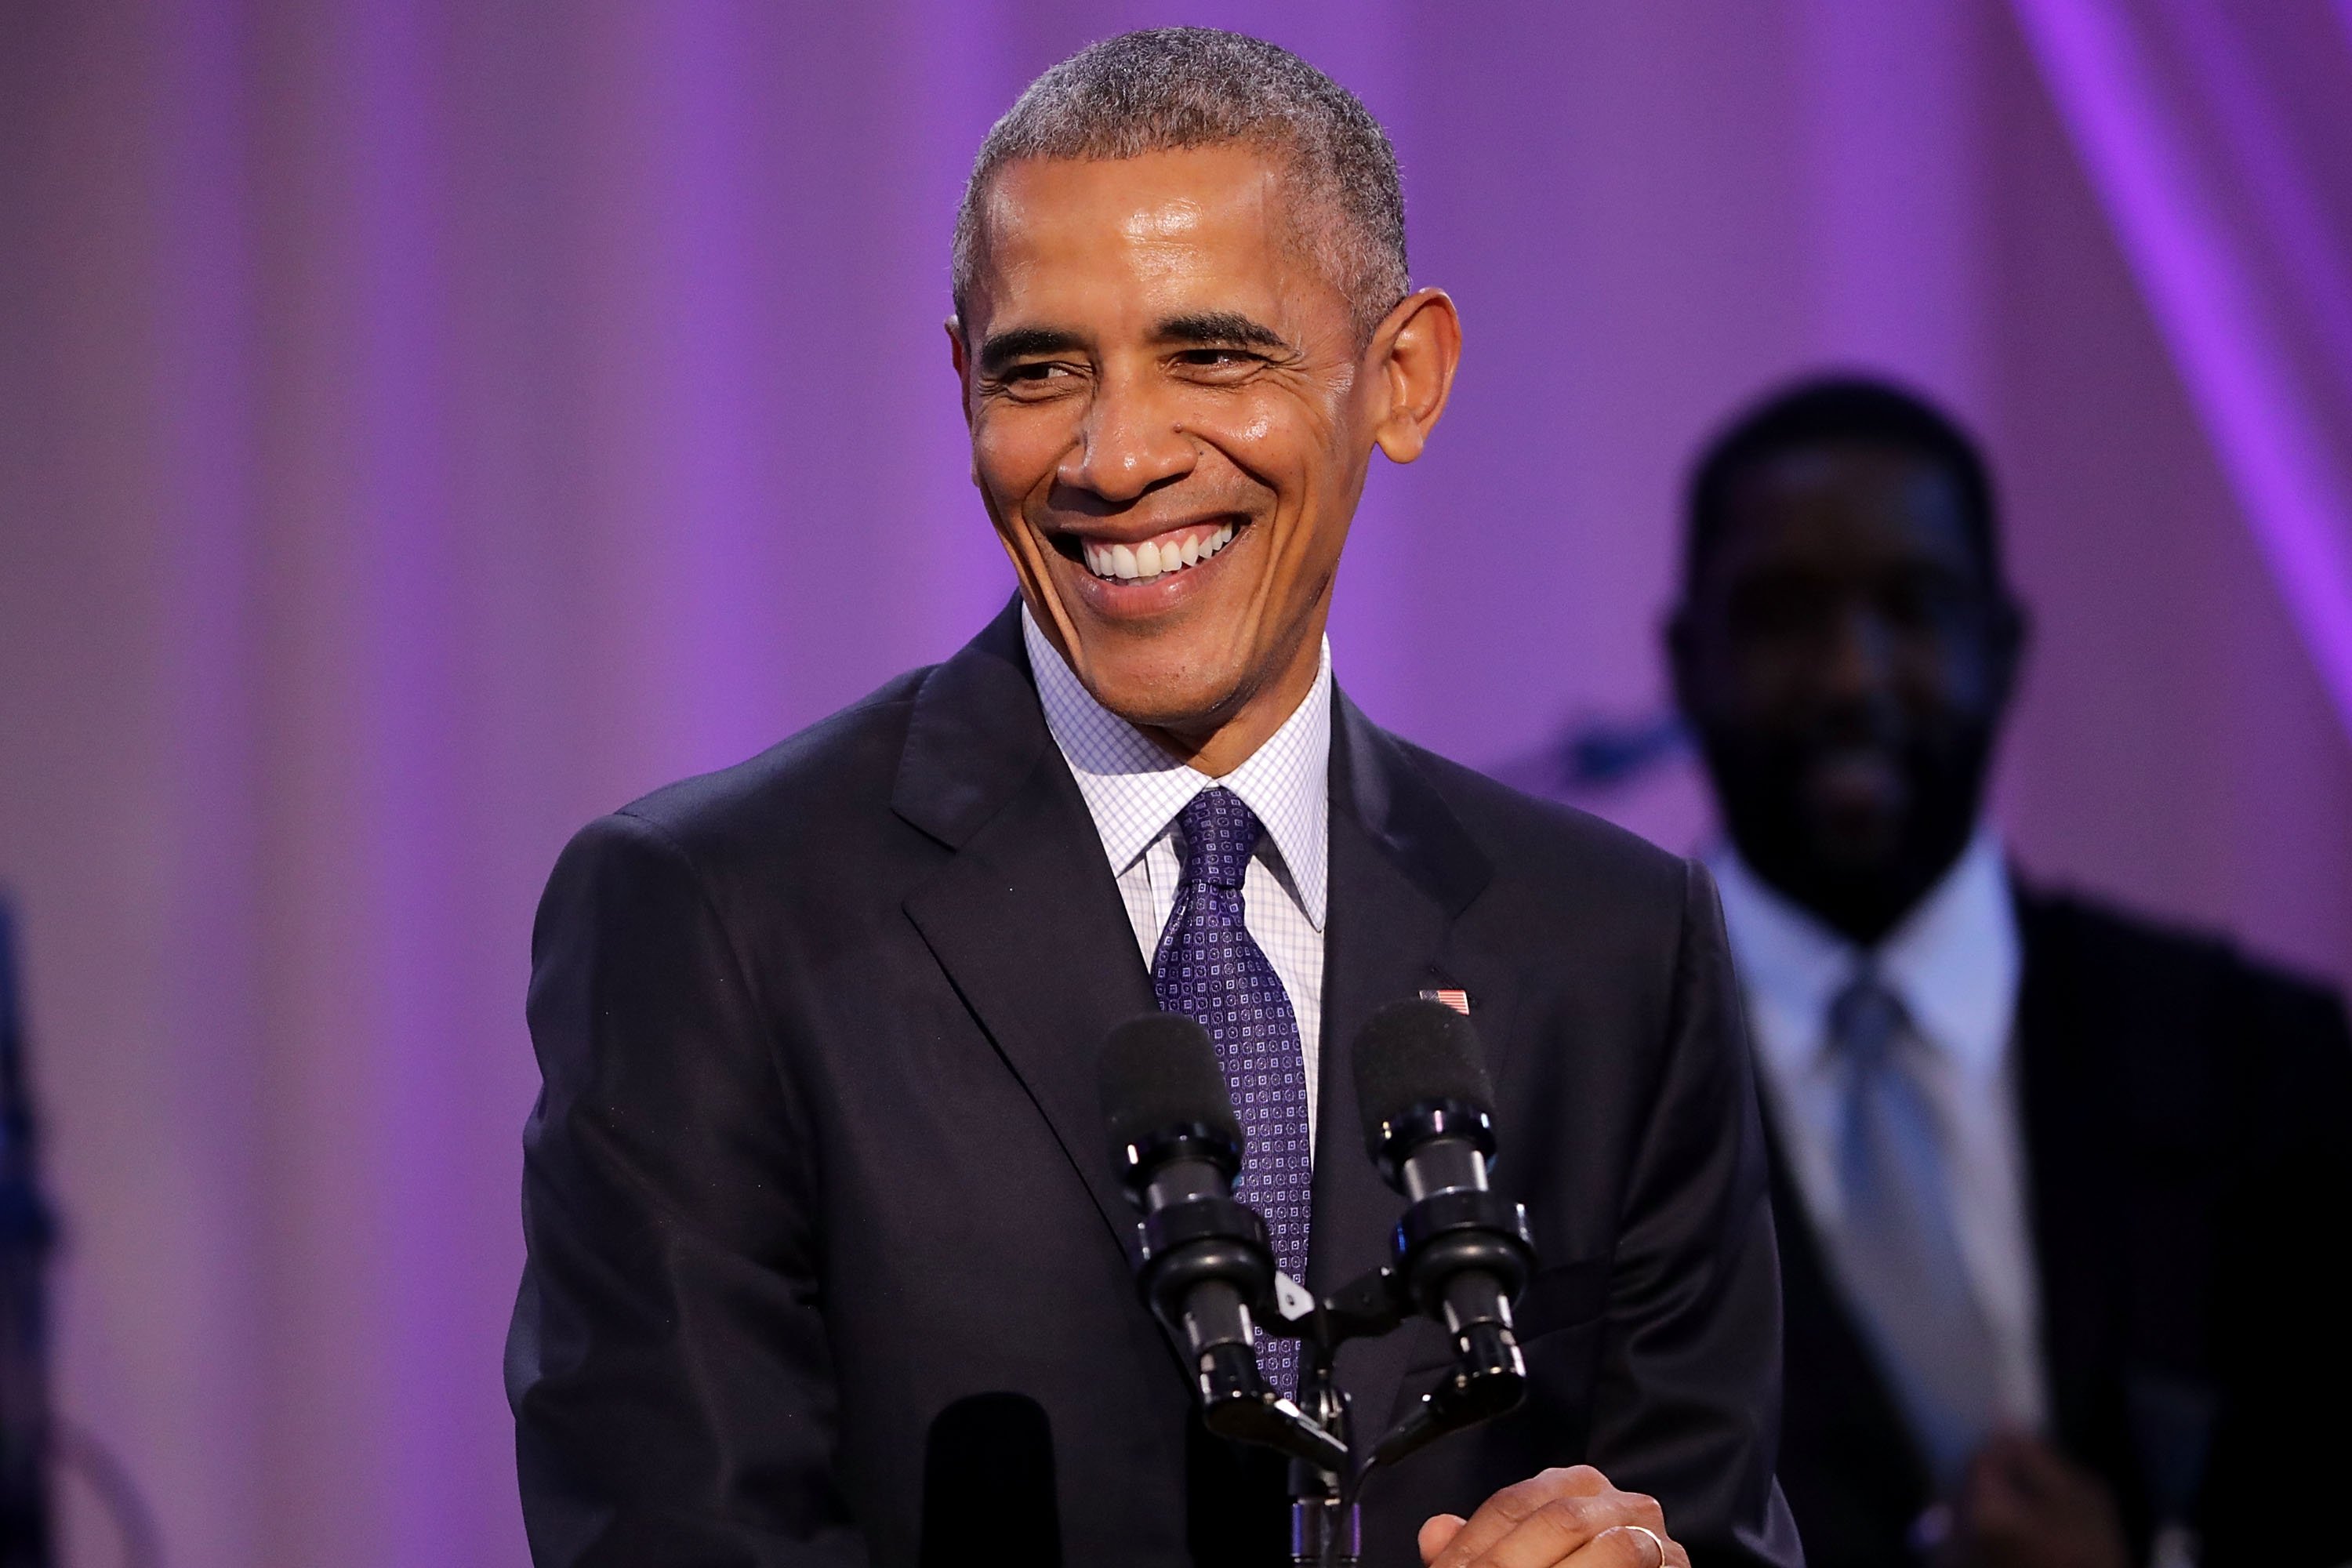 Barack Obama speaking at BET's “Love and Happiness: A Musical Experience" on October 21, 2016 at The White House in Washington, DC. | Source: Getty Images 